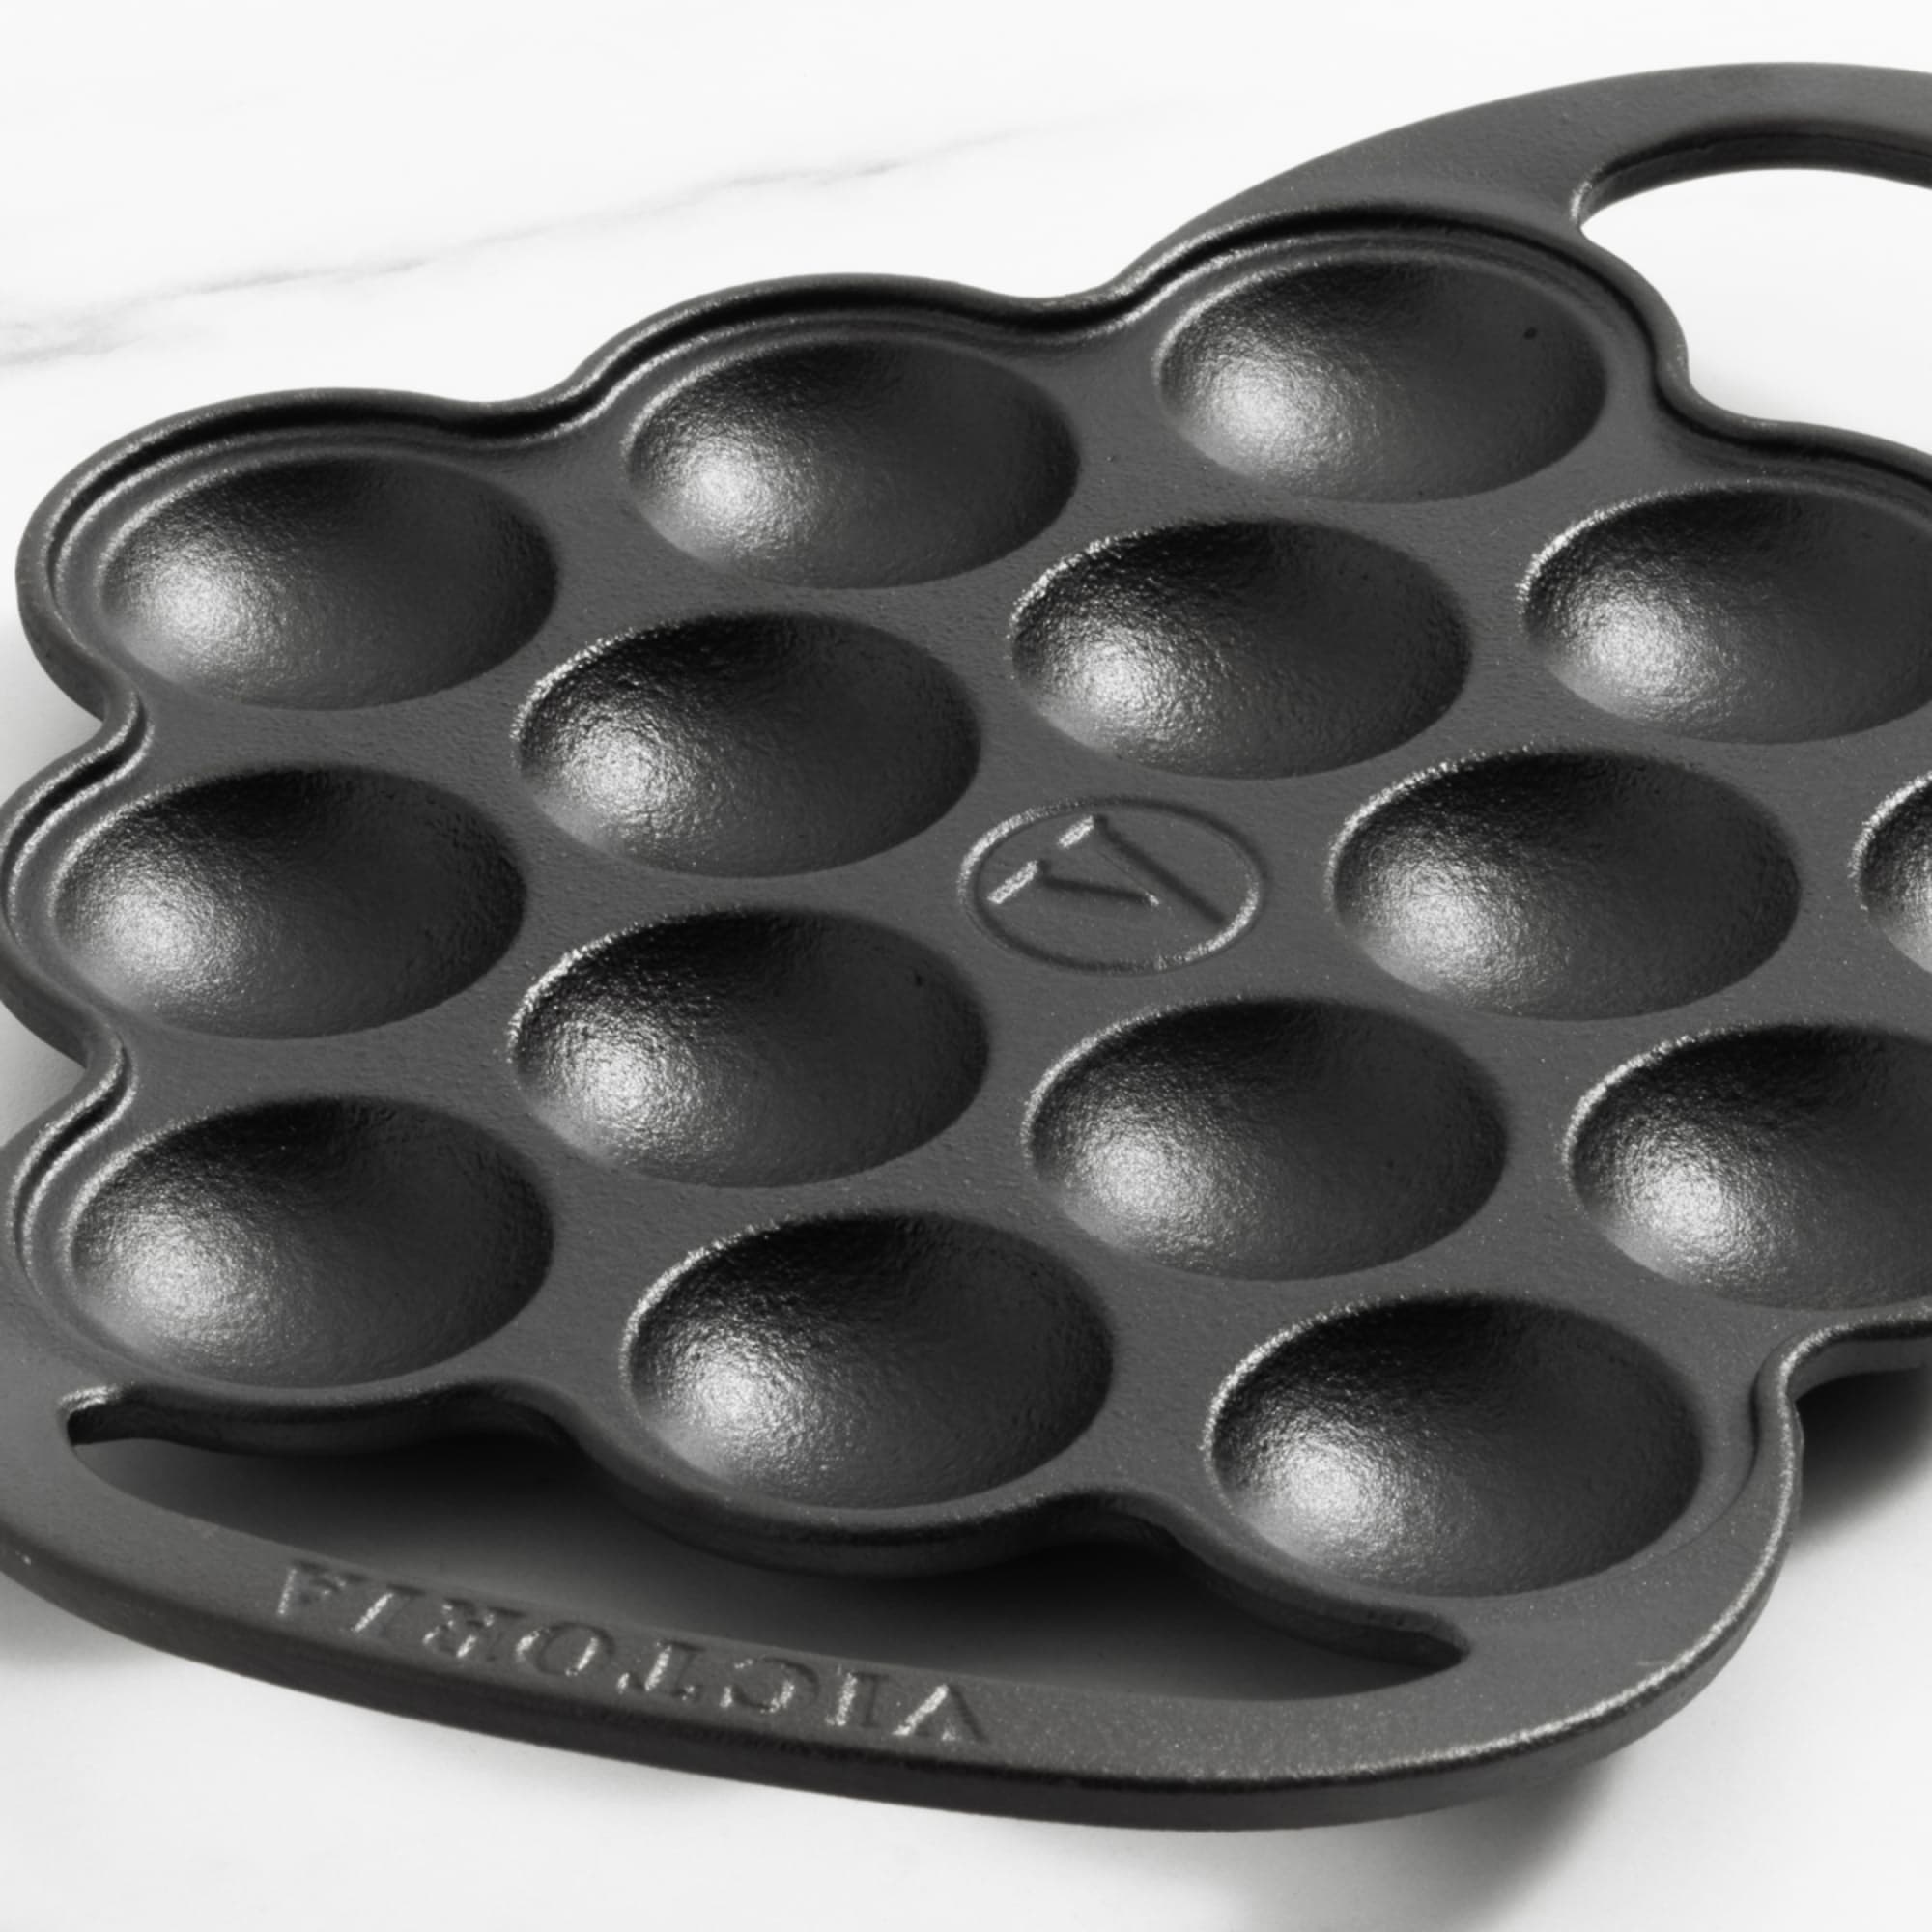 How to Use a Poffertjes Pan - Victoria Cast Iron Pan for Pancakes,  Cornbread Recipes, Cheese Snacks 